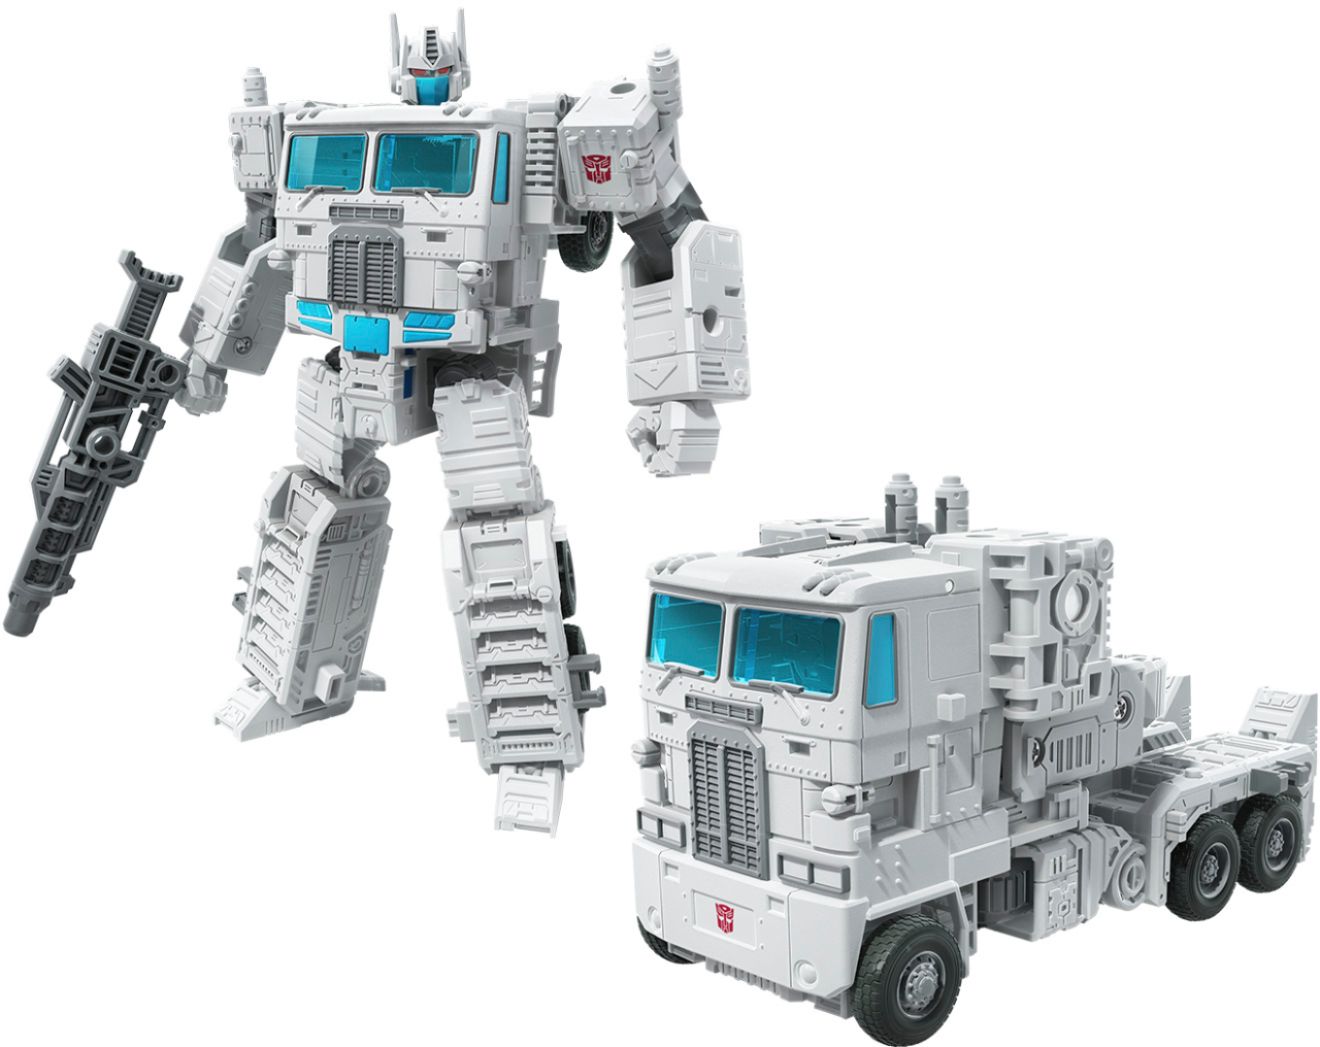 Hasbro Transformers Generations War for Cybertron Leader WFC-S13 Ultra Magnus Figure for sale online